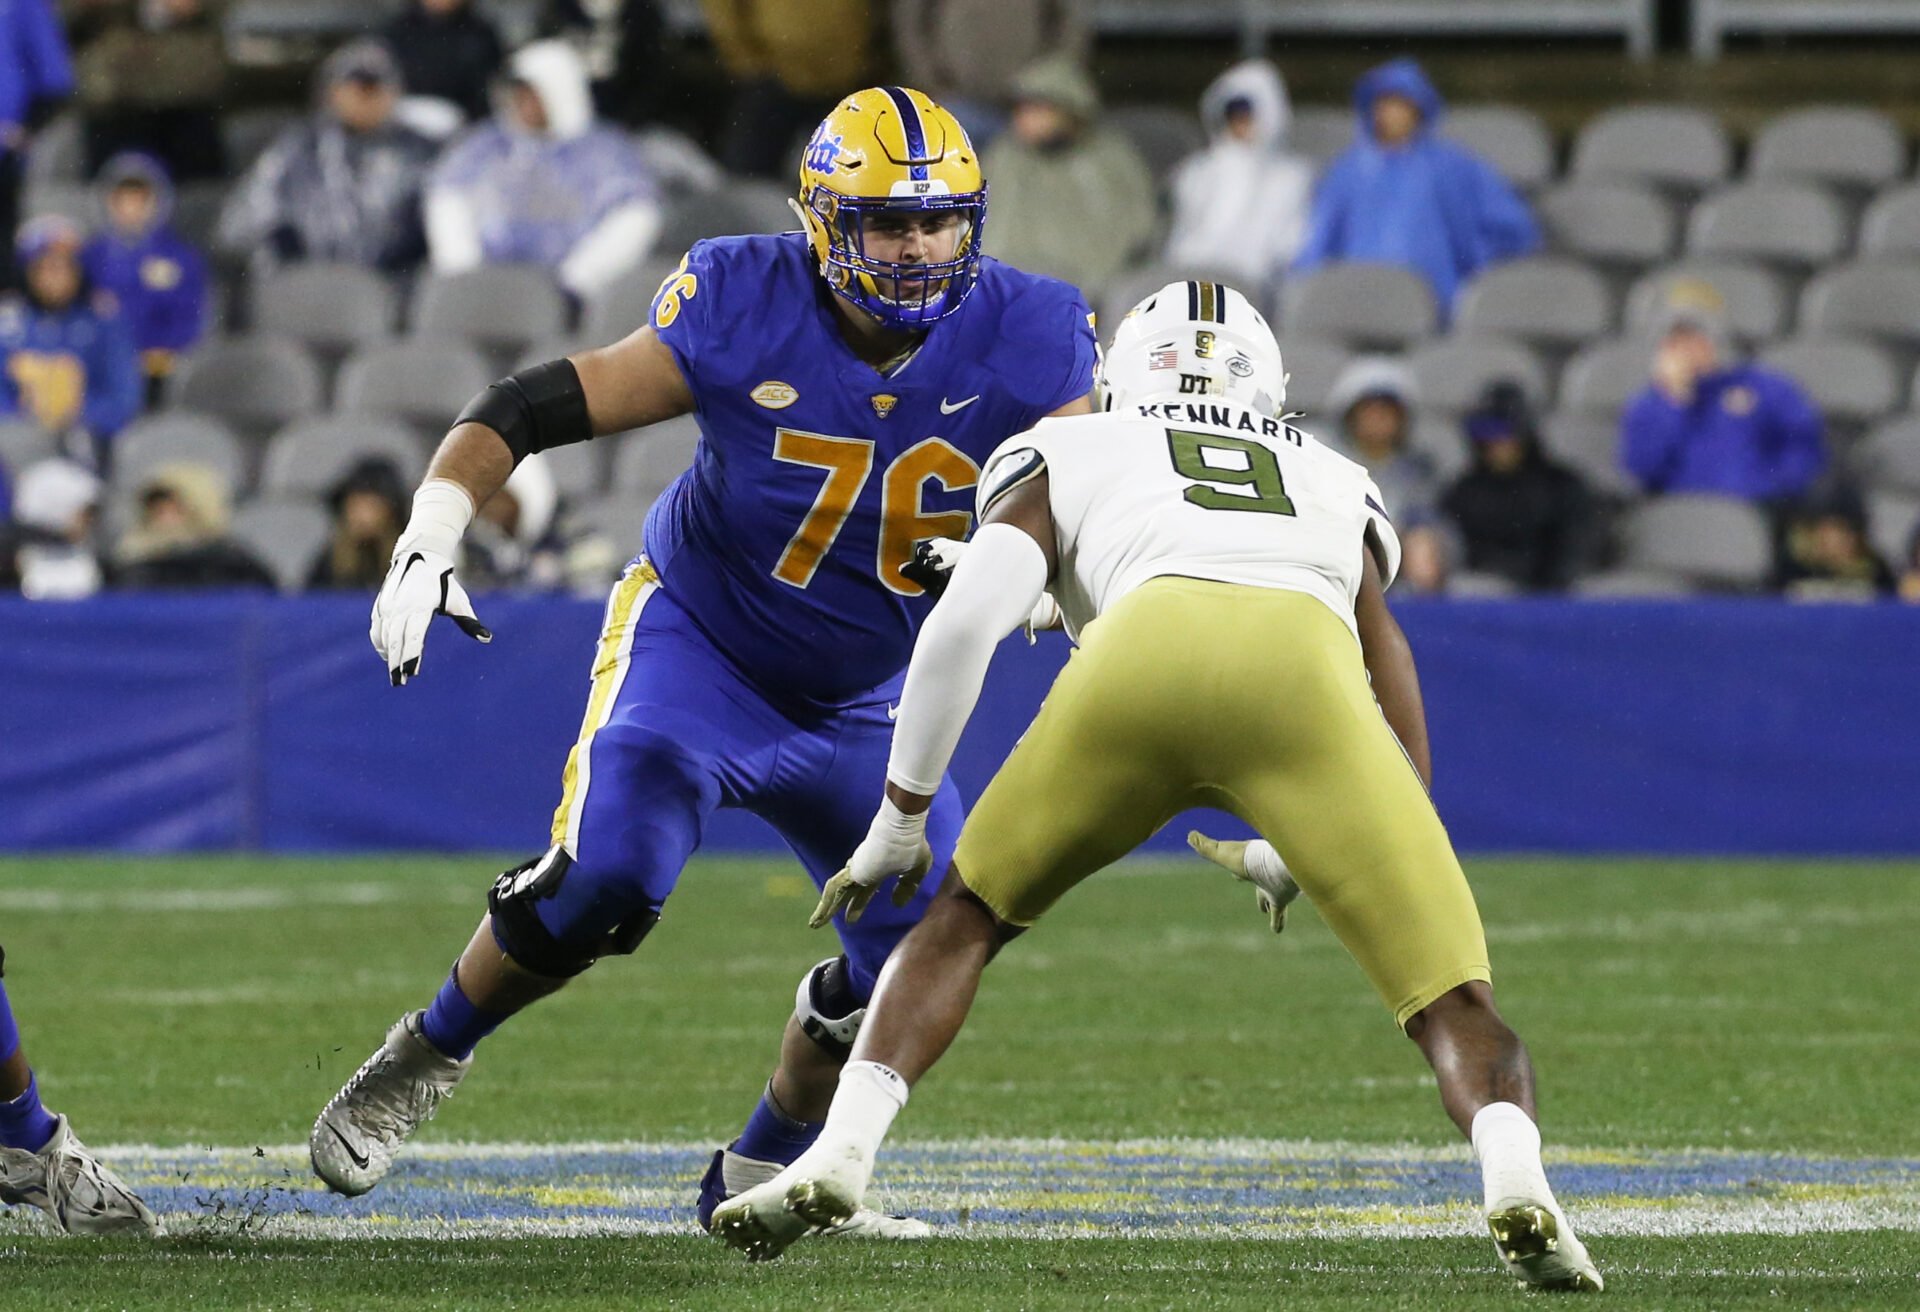 Pittsburgh Panthers offensive lineman Matt Goncalves (76) blocks at the line of scrimmage against Georgia Tech Yellow Jackets defensive lineman Kyle Kennard (9) during the second quarter at Acrisure Stadium.